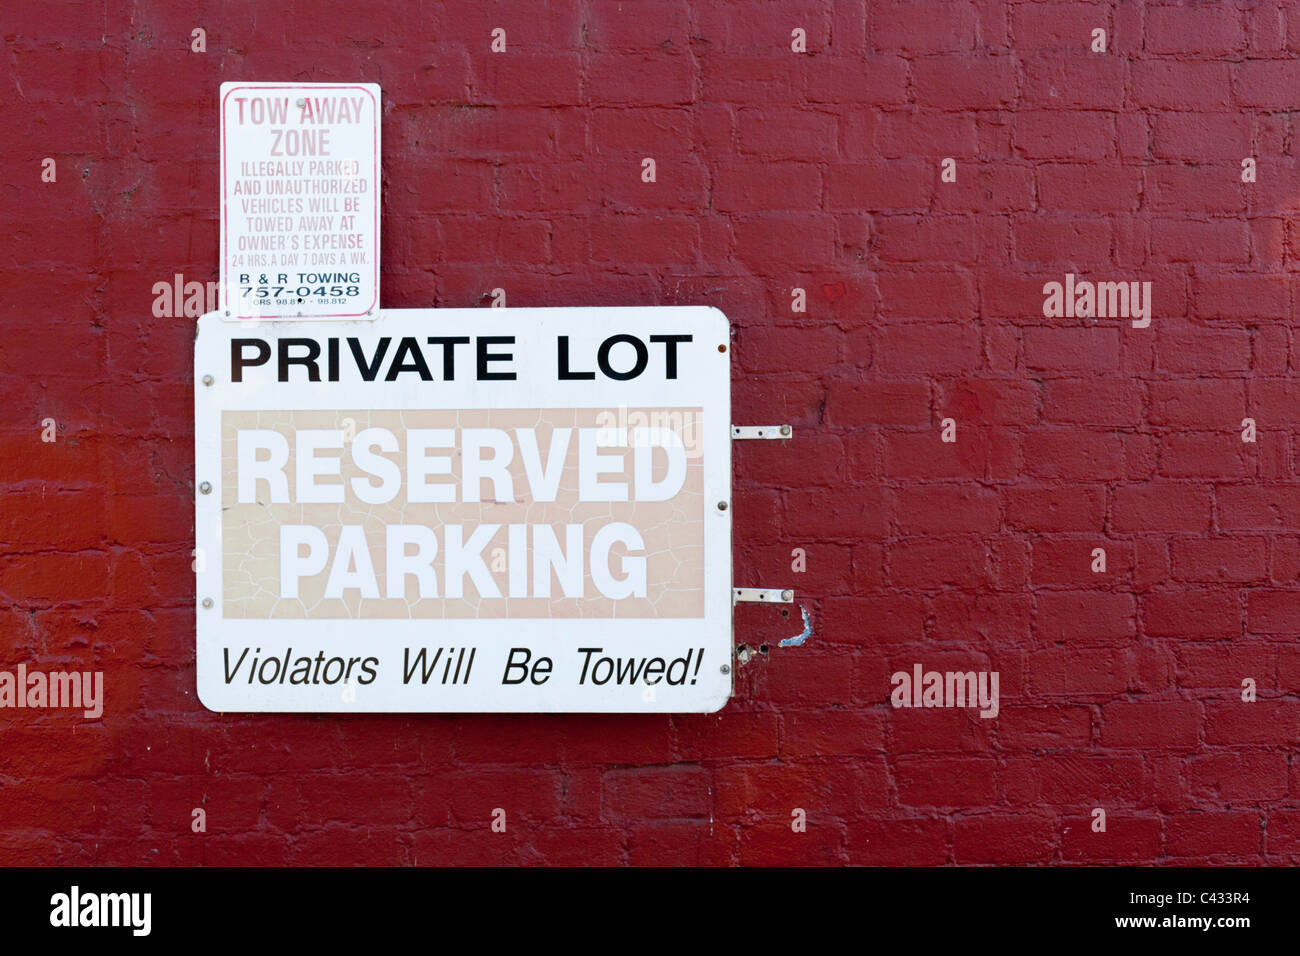 Reserved parking sign, tow away zone, Corvallis, OR Stock Photo